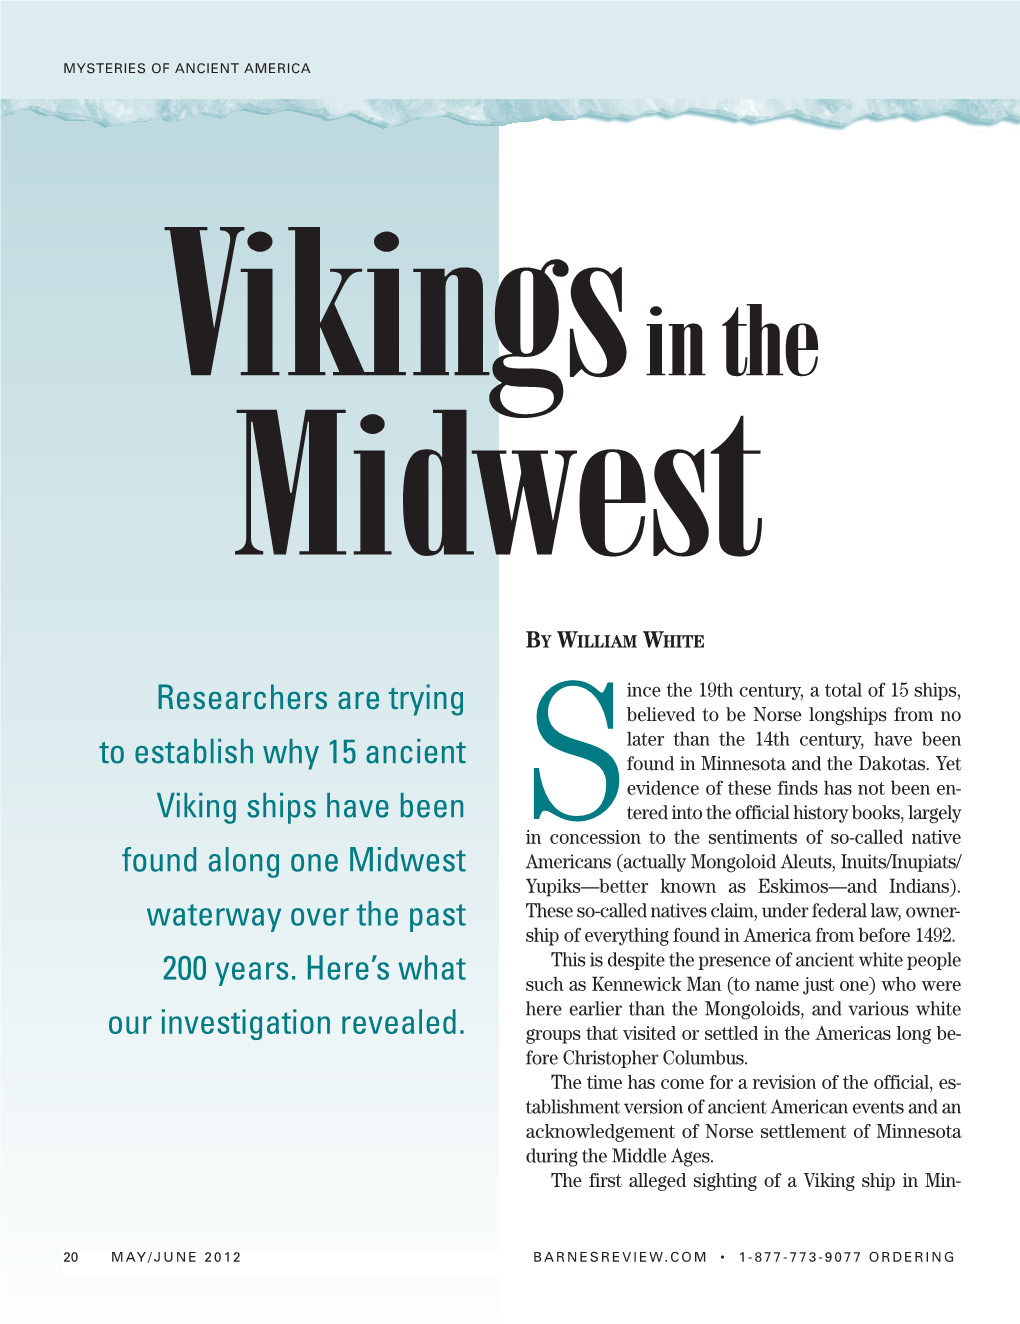 Vikings in the Midwest by William White